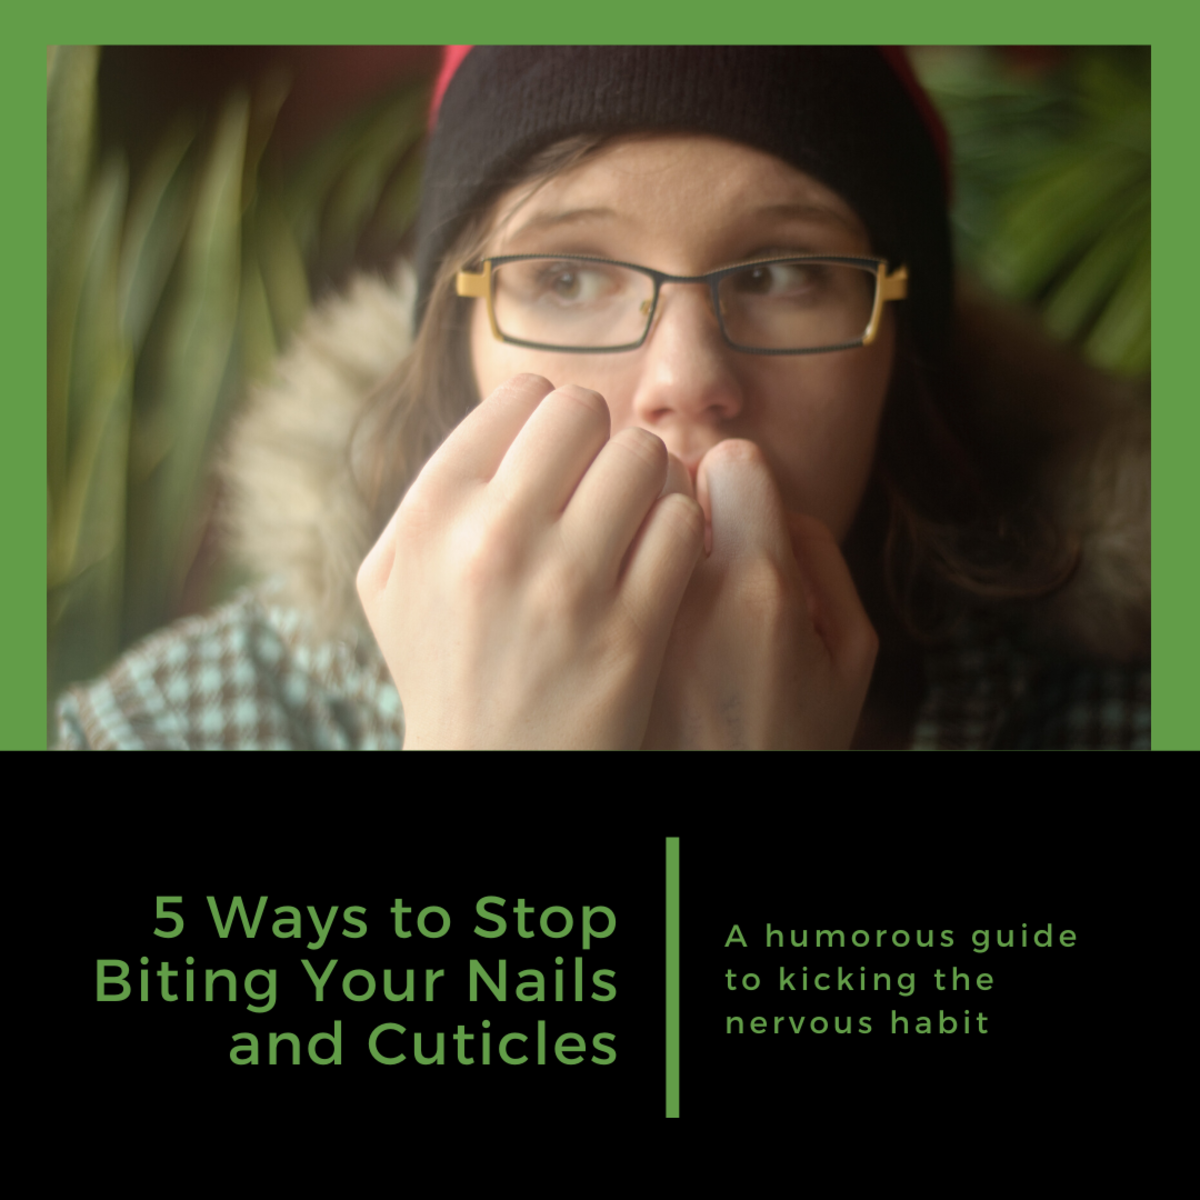 How to Stop Biting Your Nails and Cuticles!